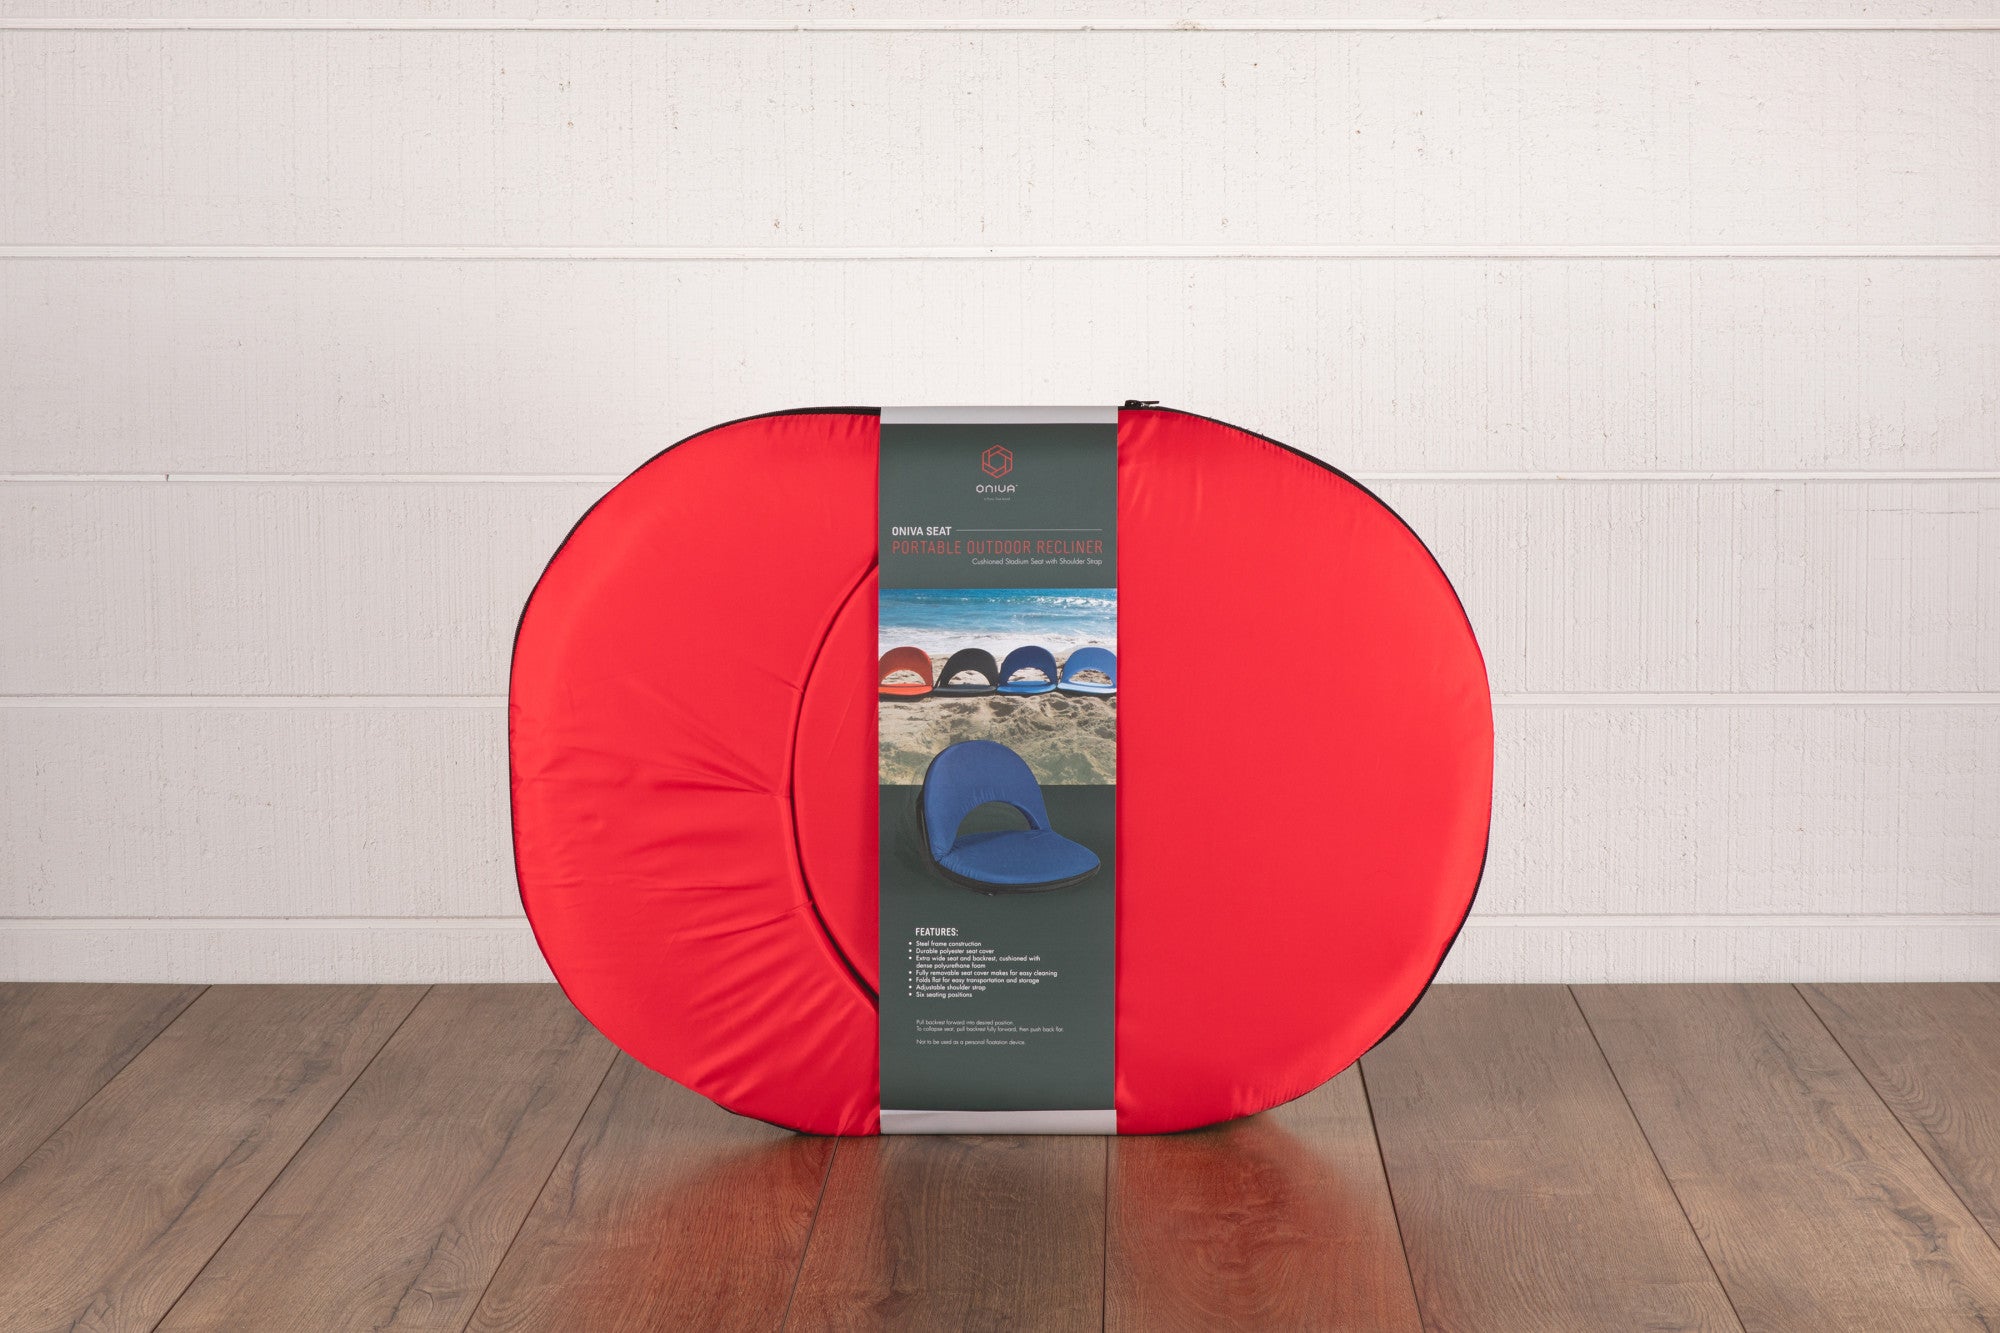 Ole Miss Rebels - Oniva Portable Reclining Seat